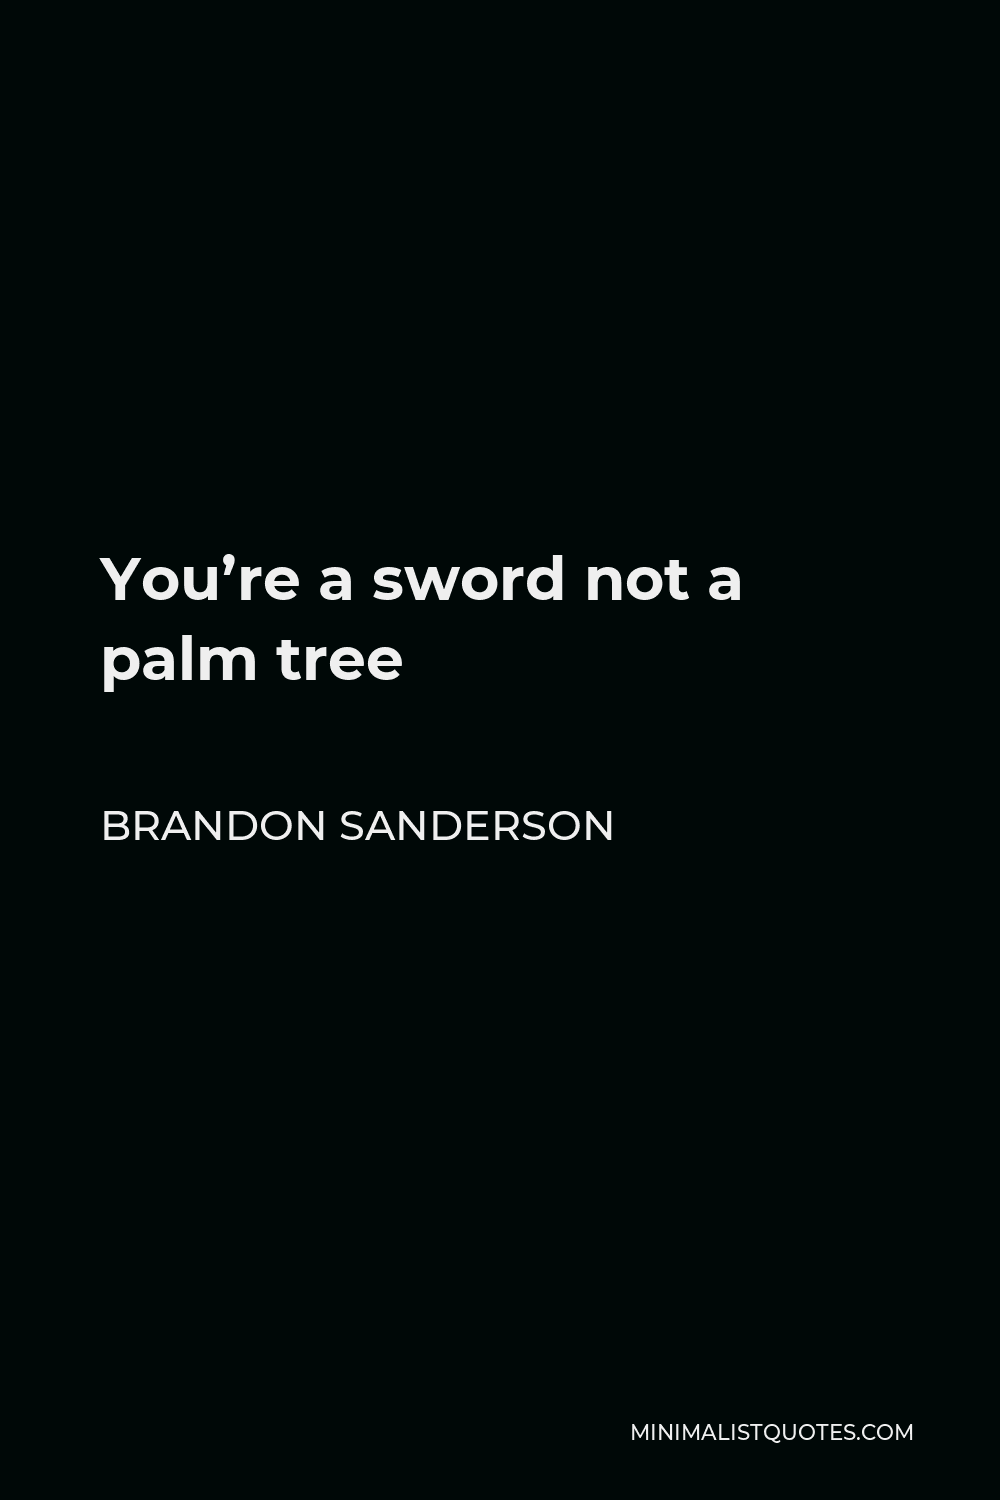 Brandon Sanderson Quote - You’re a sword not a palm tree